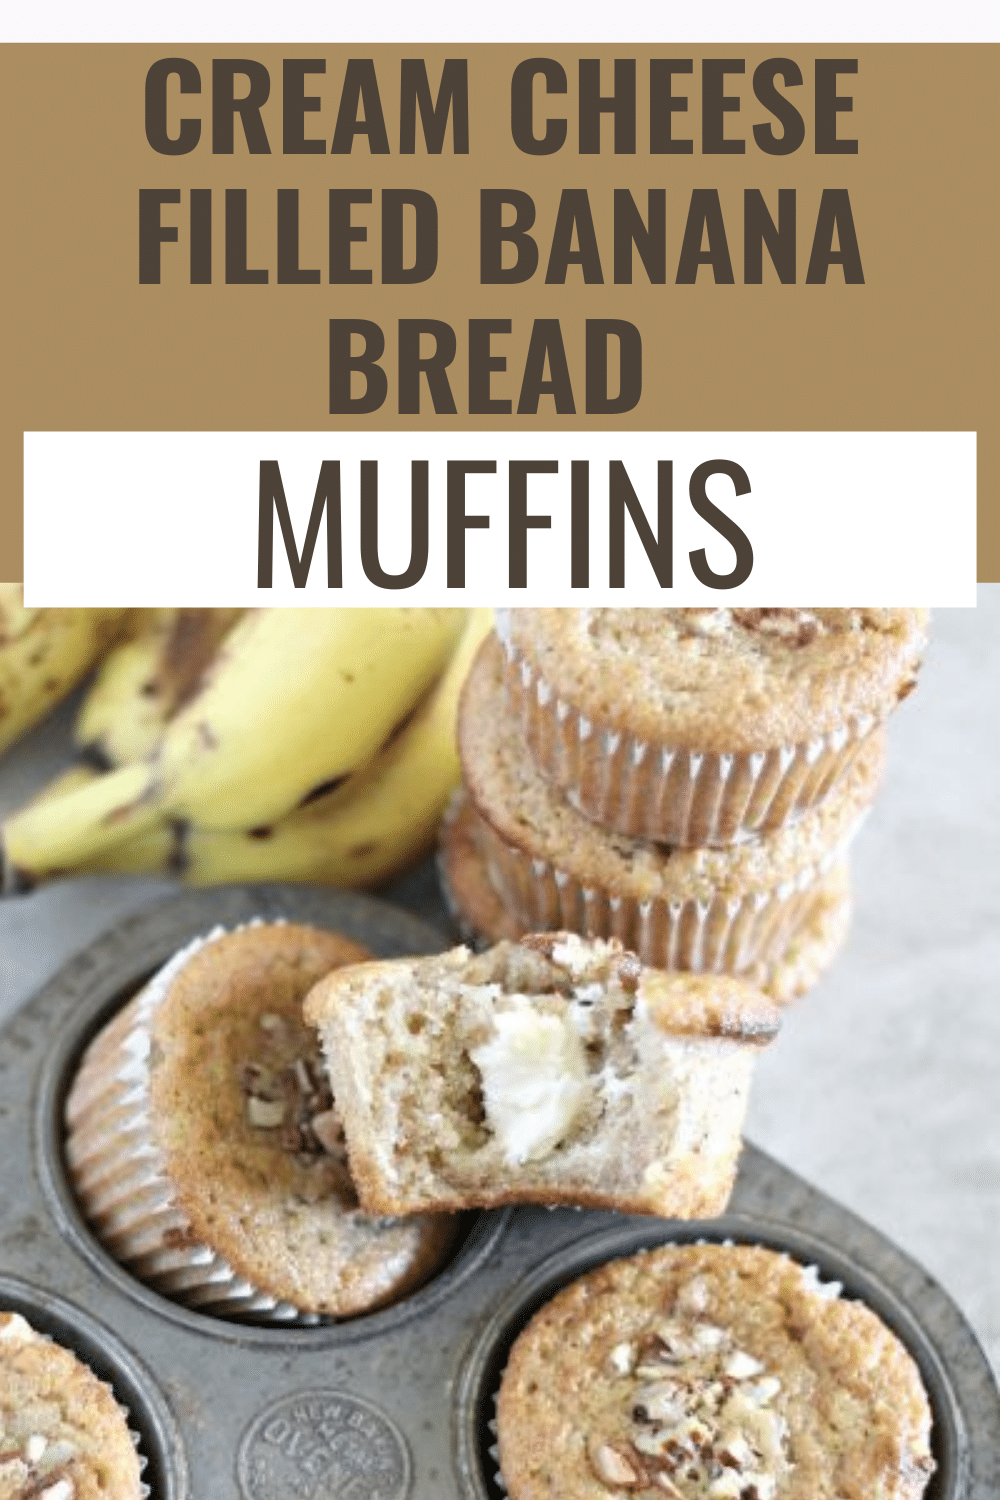 Cream Cheese Filled Banana Bread Muffins take banana bread to a new level. The sweet cheesecake-like filling inside each and every banana muffin is heavenly. #muffins #bananabread #creamcheese via @wondermomwannab